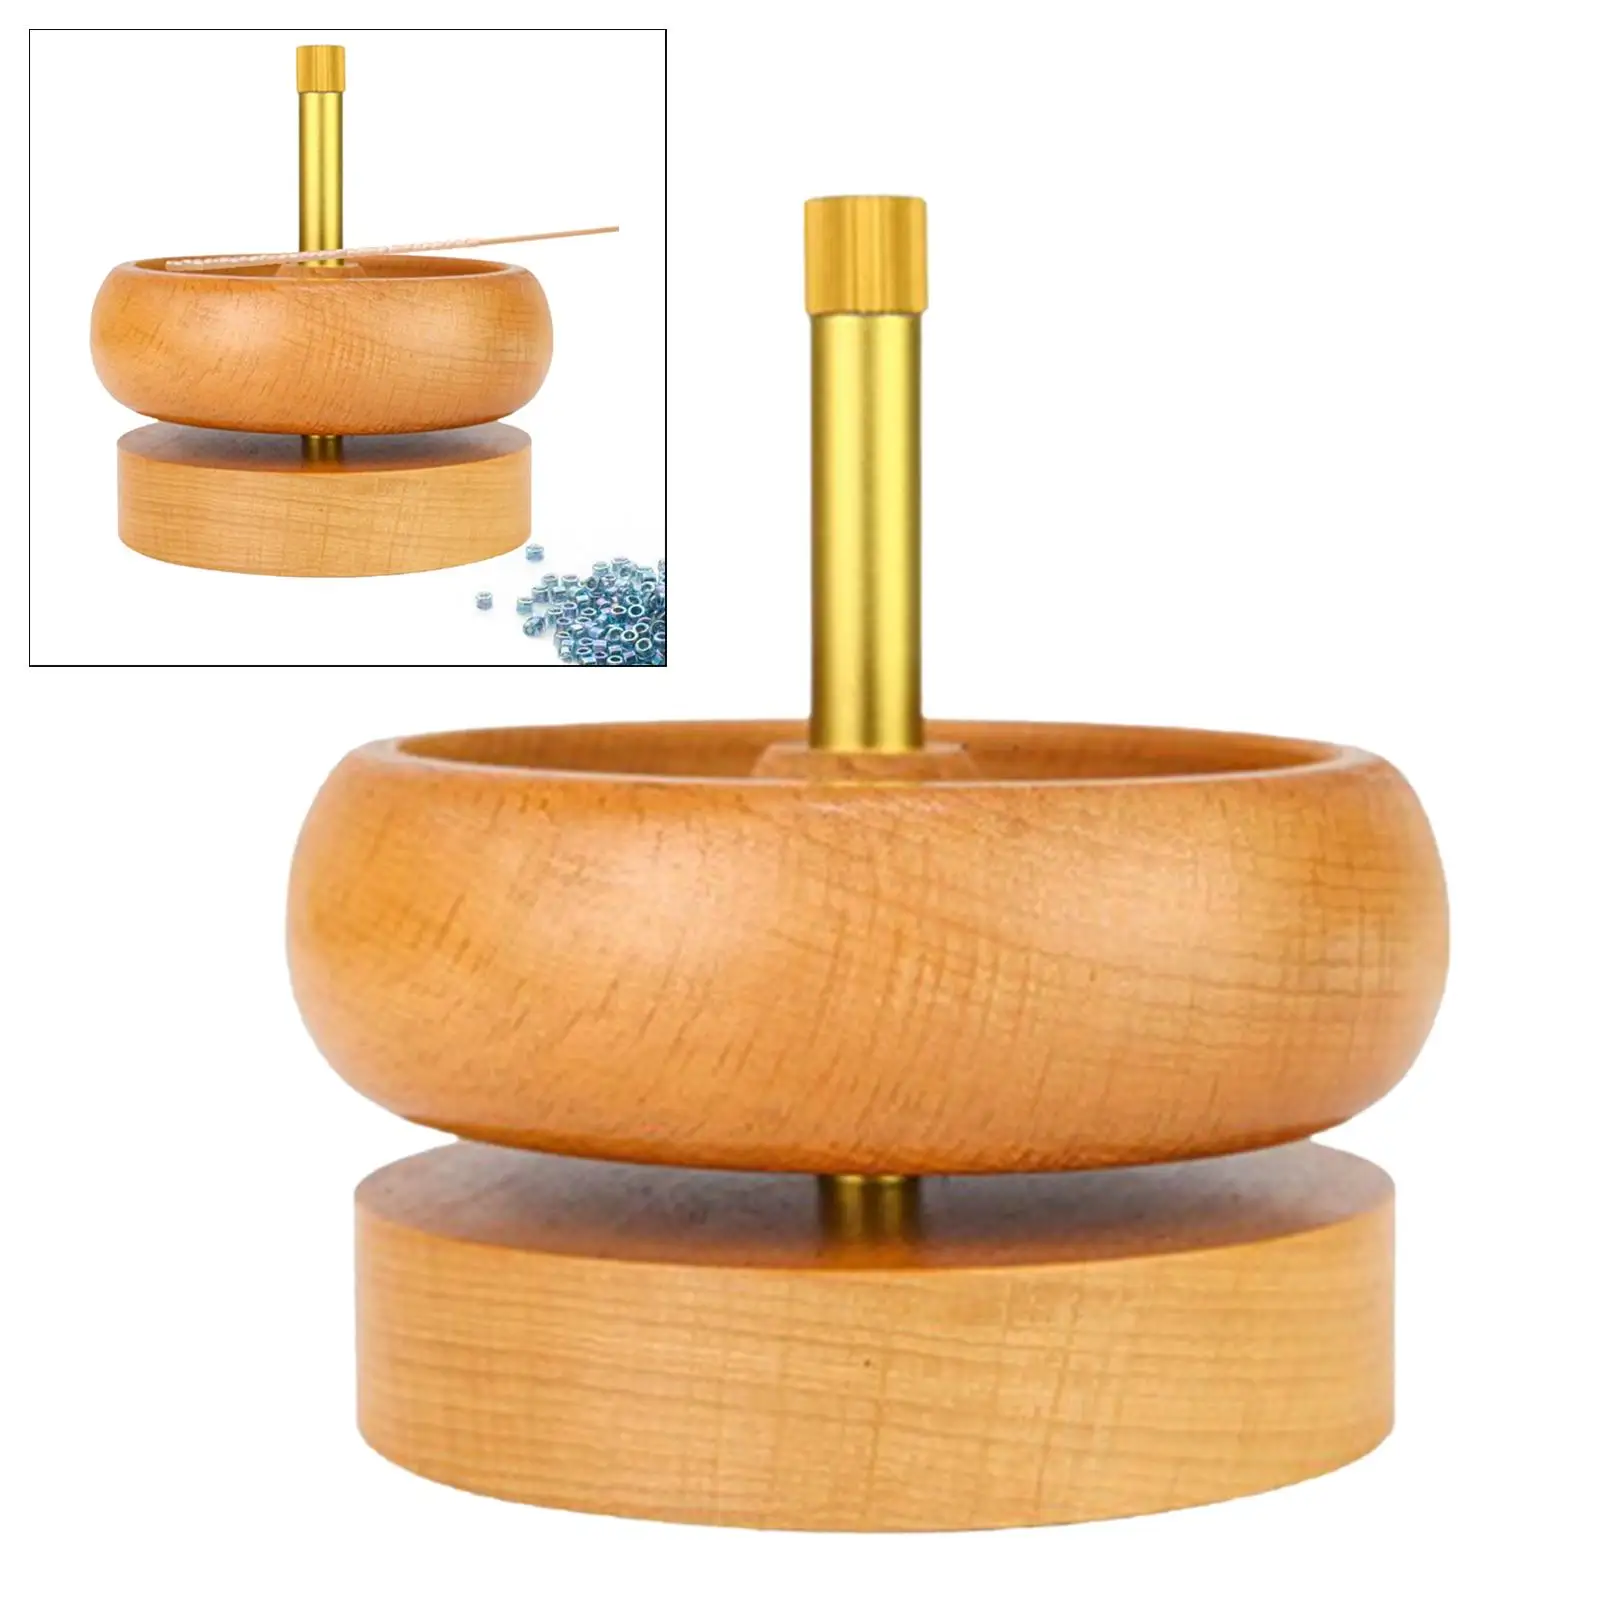 Yarn Ball Holder Spinning Knitting Tools Organizer Sewing Durable Wood Yarn Holder for Embroidery Accessory Knitting Crocheting